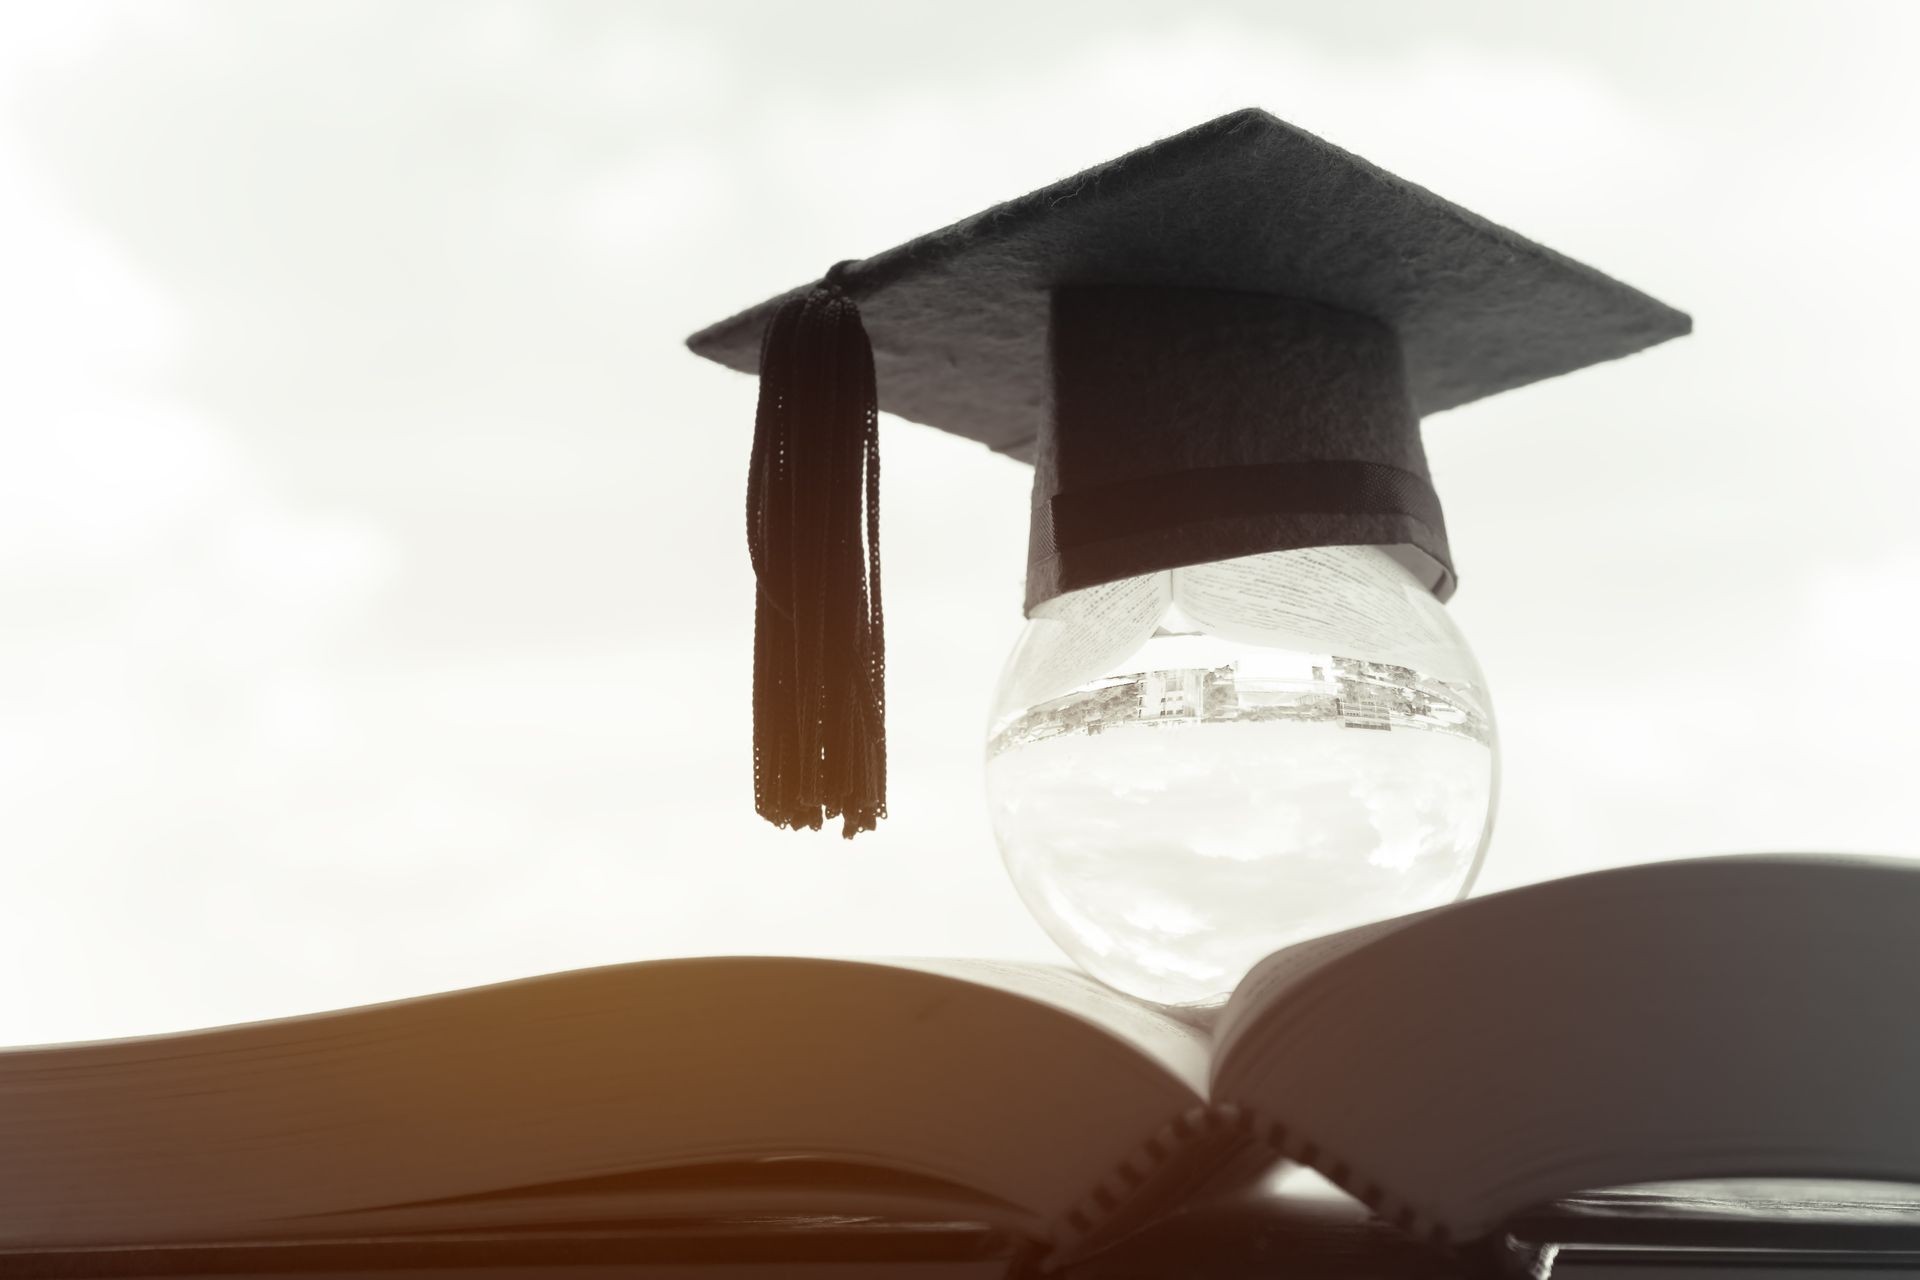 Education in Global, Graduation cap on top crystal ball on textbook. Concept of abroad international Educational, Back to School and Studies lead to success in world wide. Black and white tone